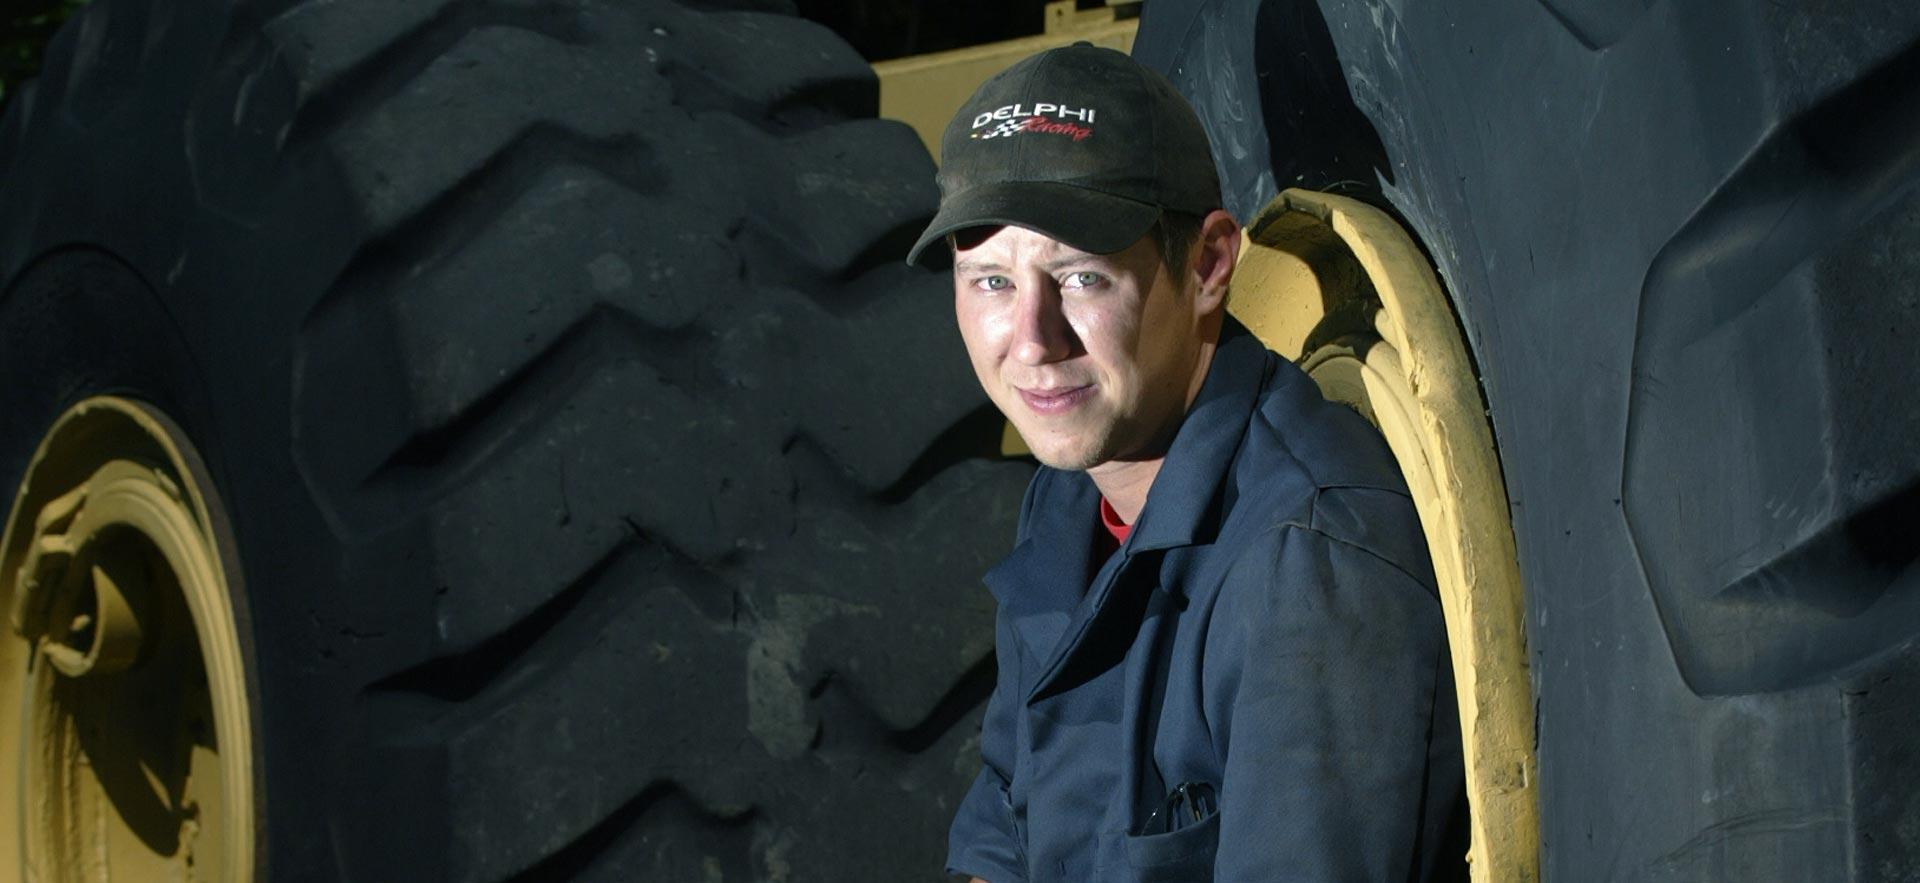 One male heavy equipment student poses for a photo in front of some truck tires..